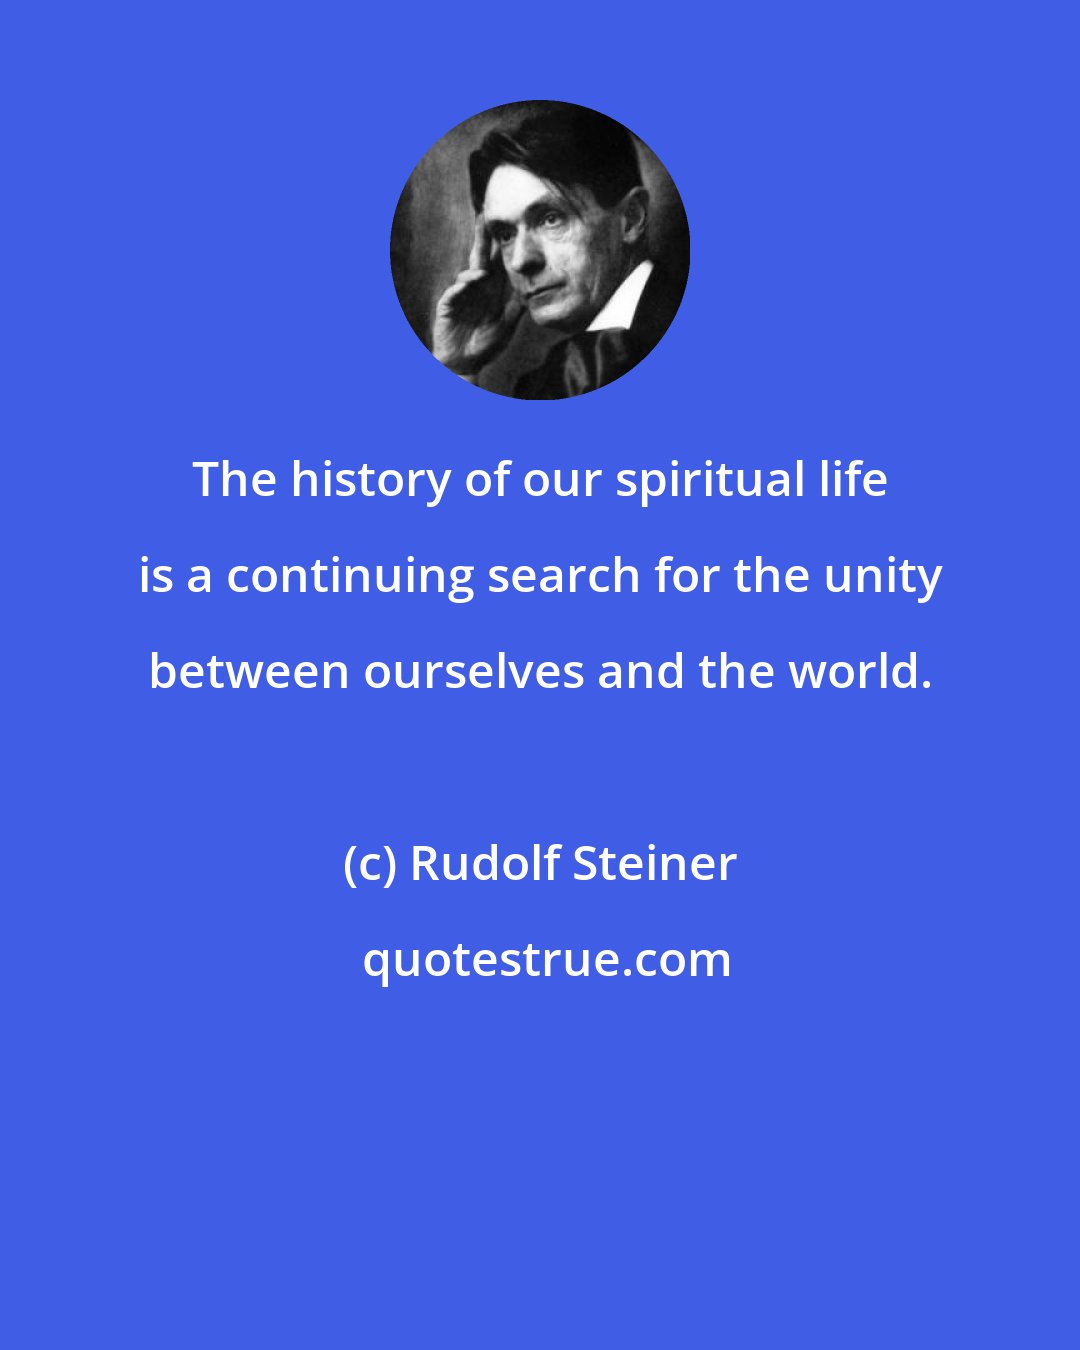 Rudolf Steiner: The history of our spiritual life is a continuing search for the unity between ourselves and the world.